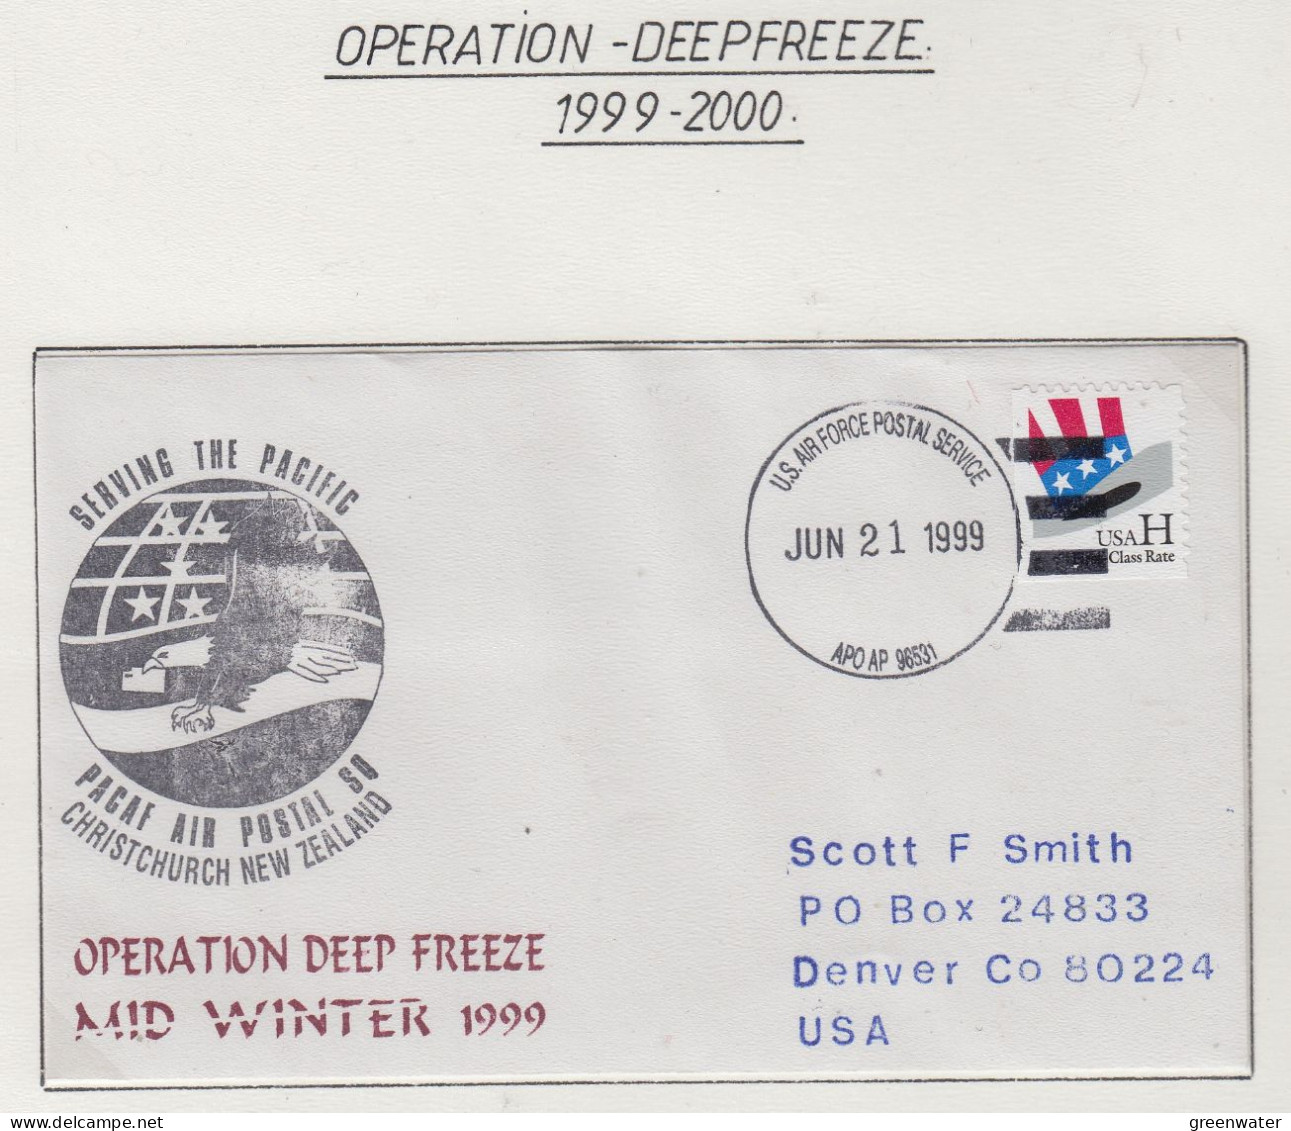 USA  Serving The Pacific Pacaf Air Postal 80 Mid Winter 1999 Ca US Air Force JUN 21 1999 (OD158) - Midwinter